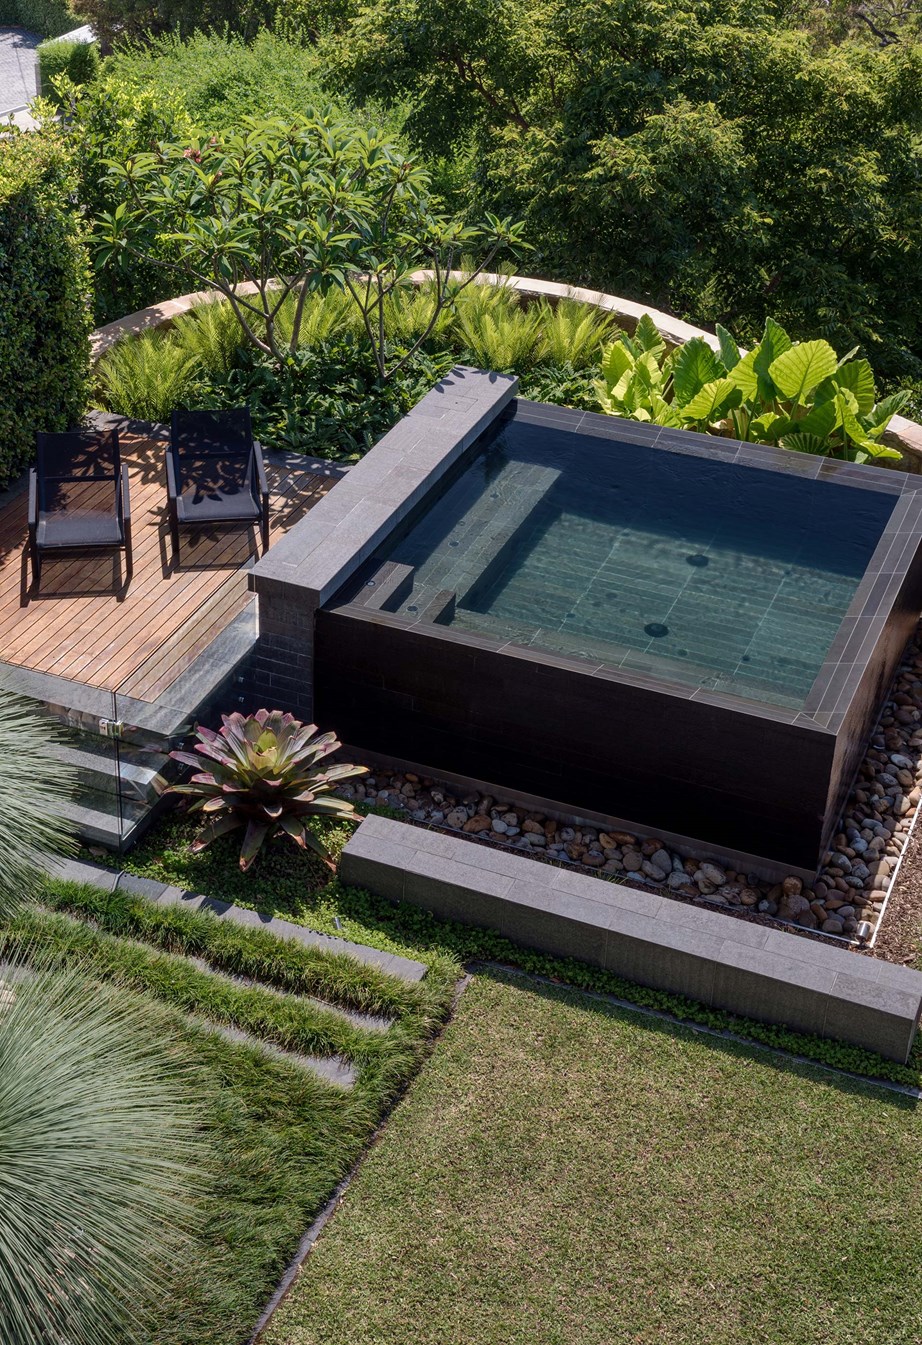 A short on space? A plunge pool can be design for the most compact backyards. *Photo:* Nick Watt / *bauersyndication.com.au*